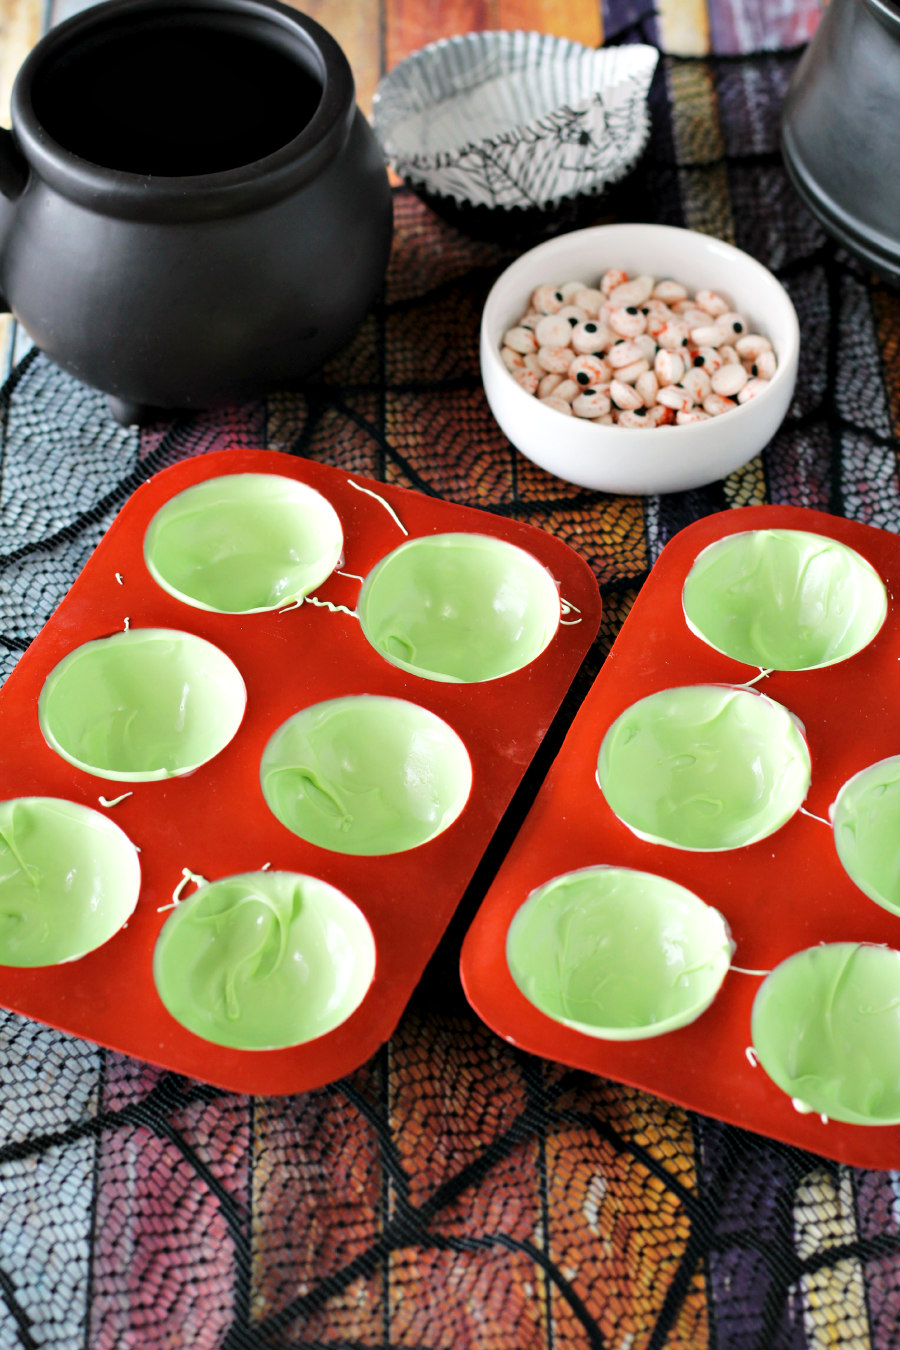 Light green candy melts spooned into silicone hot cocoa bomb molds. Cauldron mug, cupcake liners, and eyeball sprinkles in background.